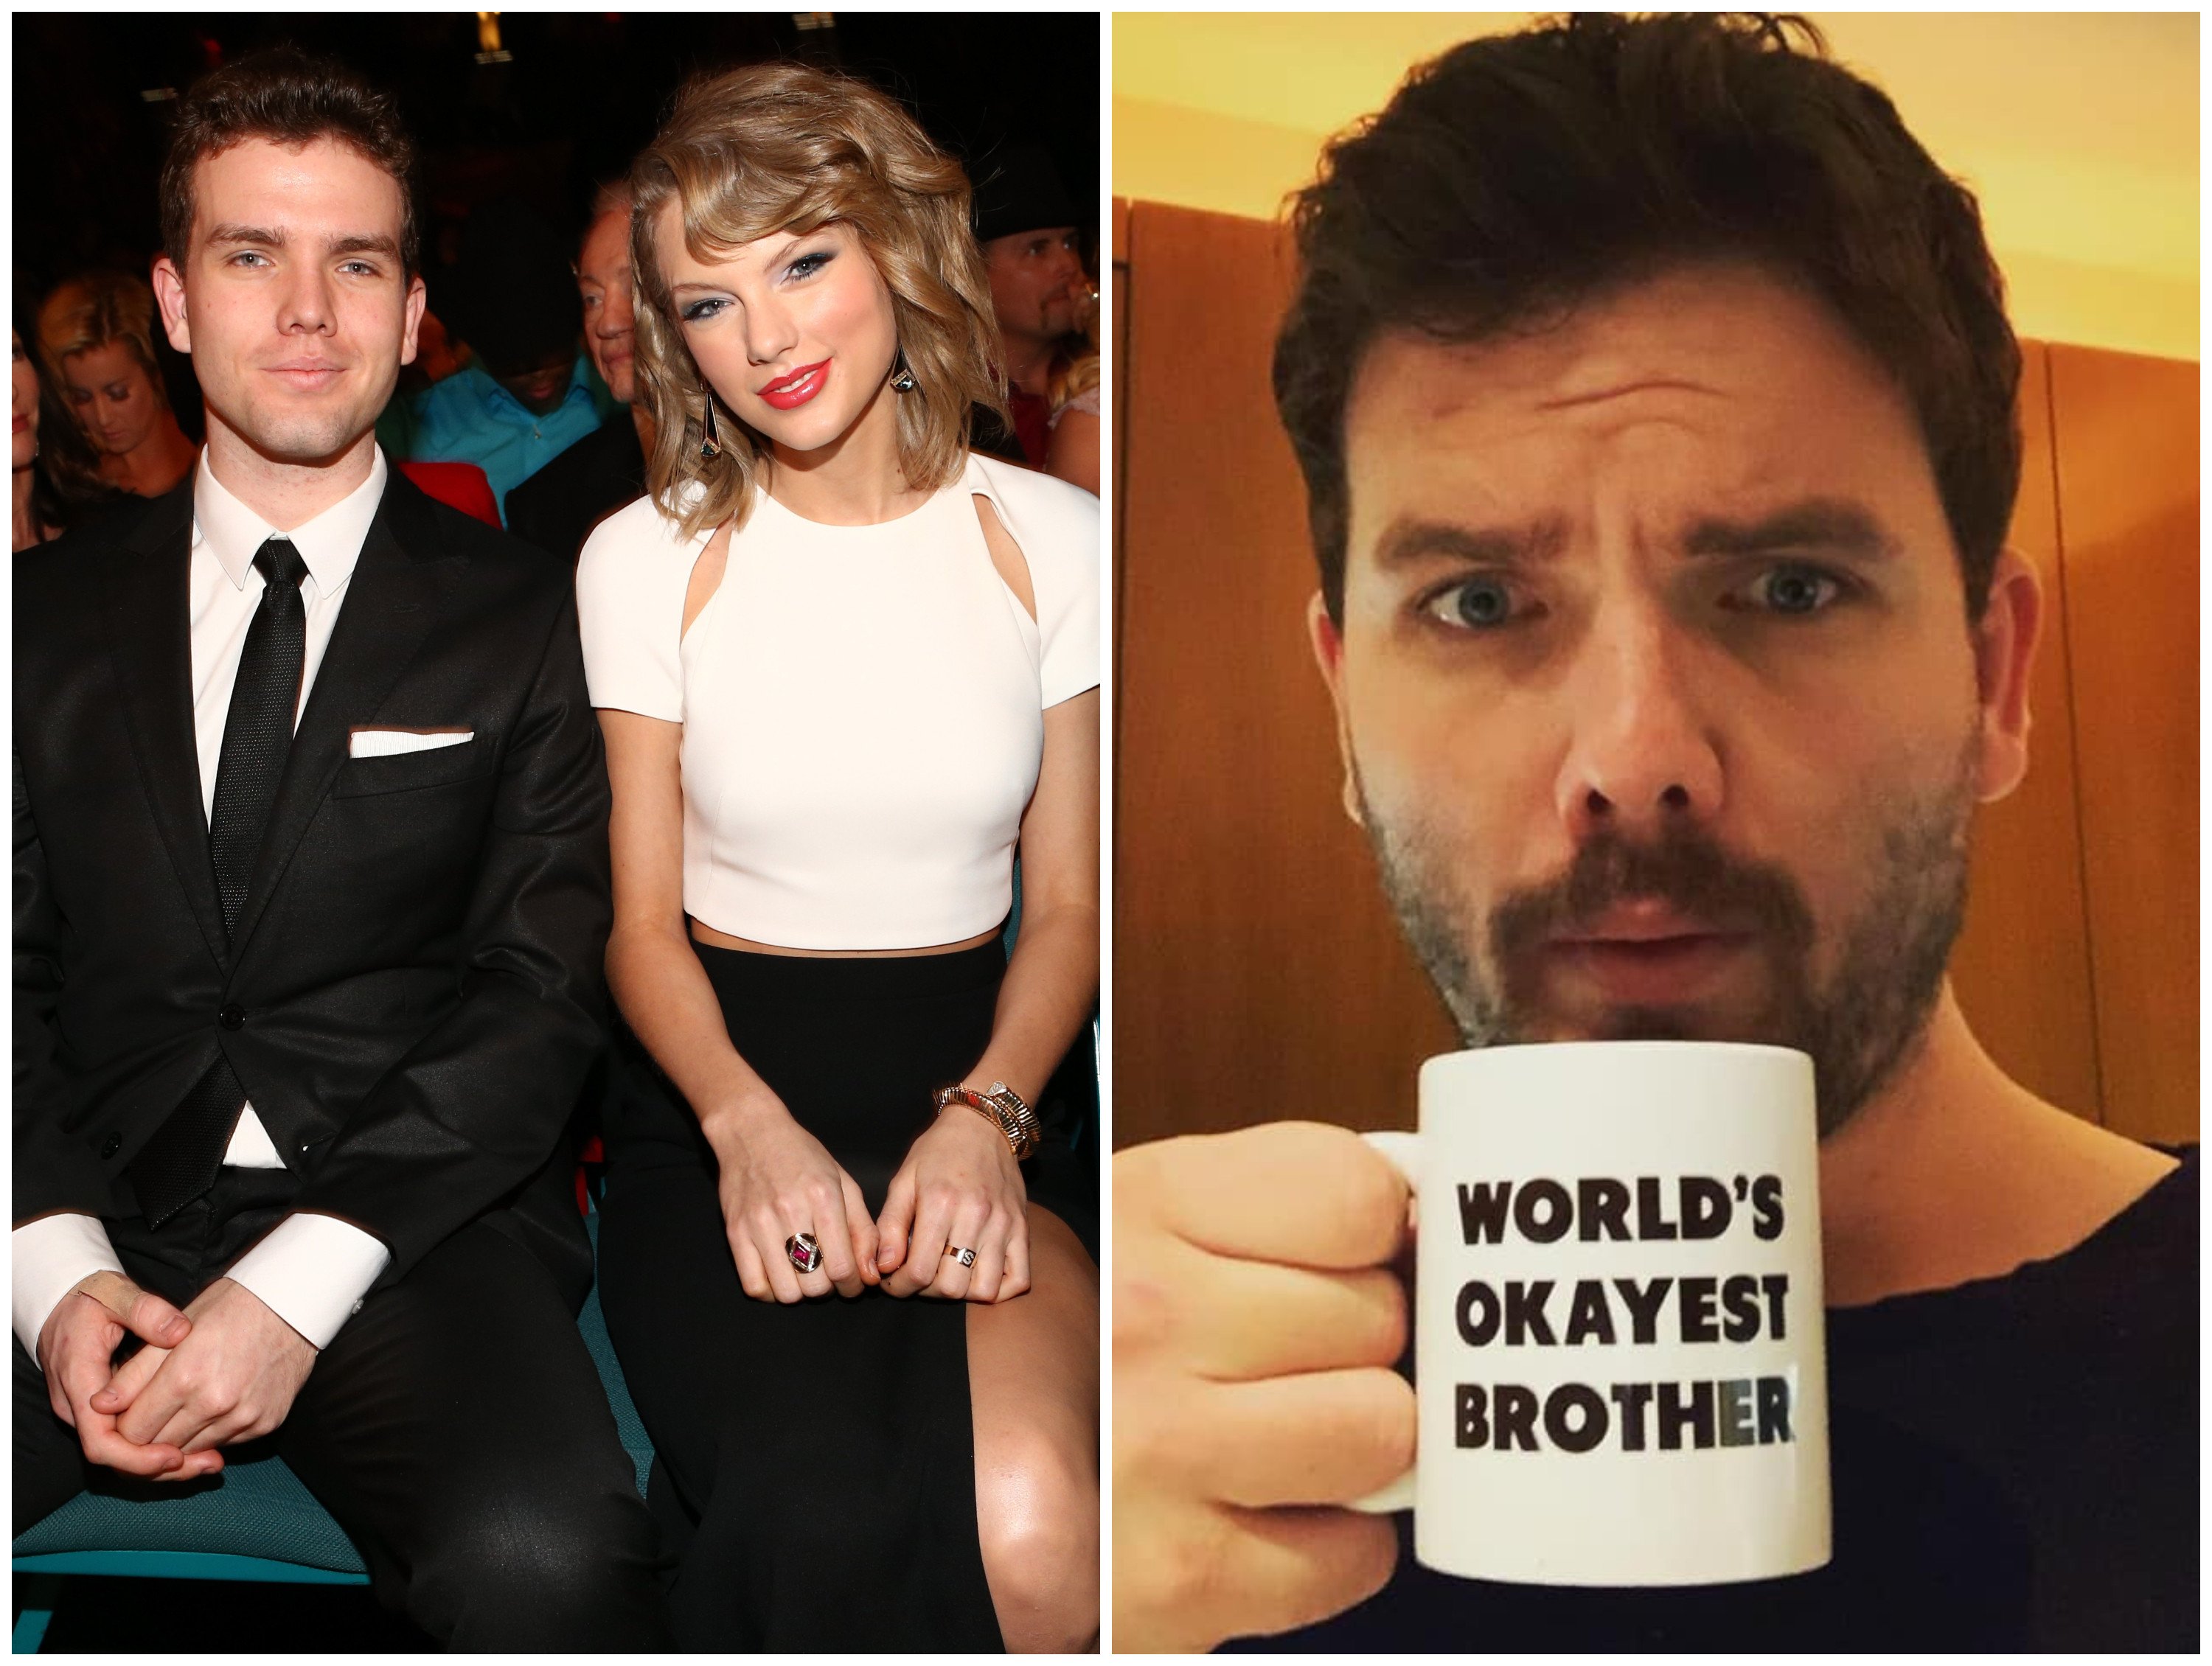 Siblings Austin and Taylor Swift share a close bond and have grown up together in the spotlight. Photos: Getty Images, Austin Swift/Facebook